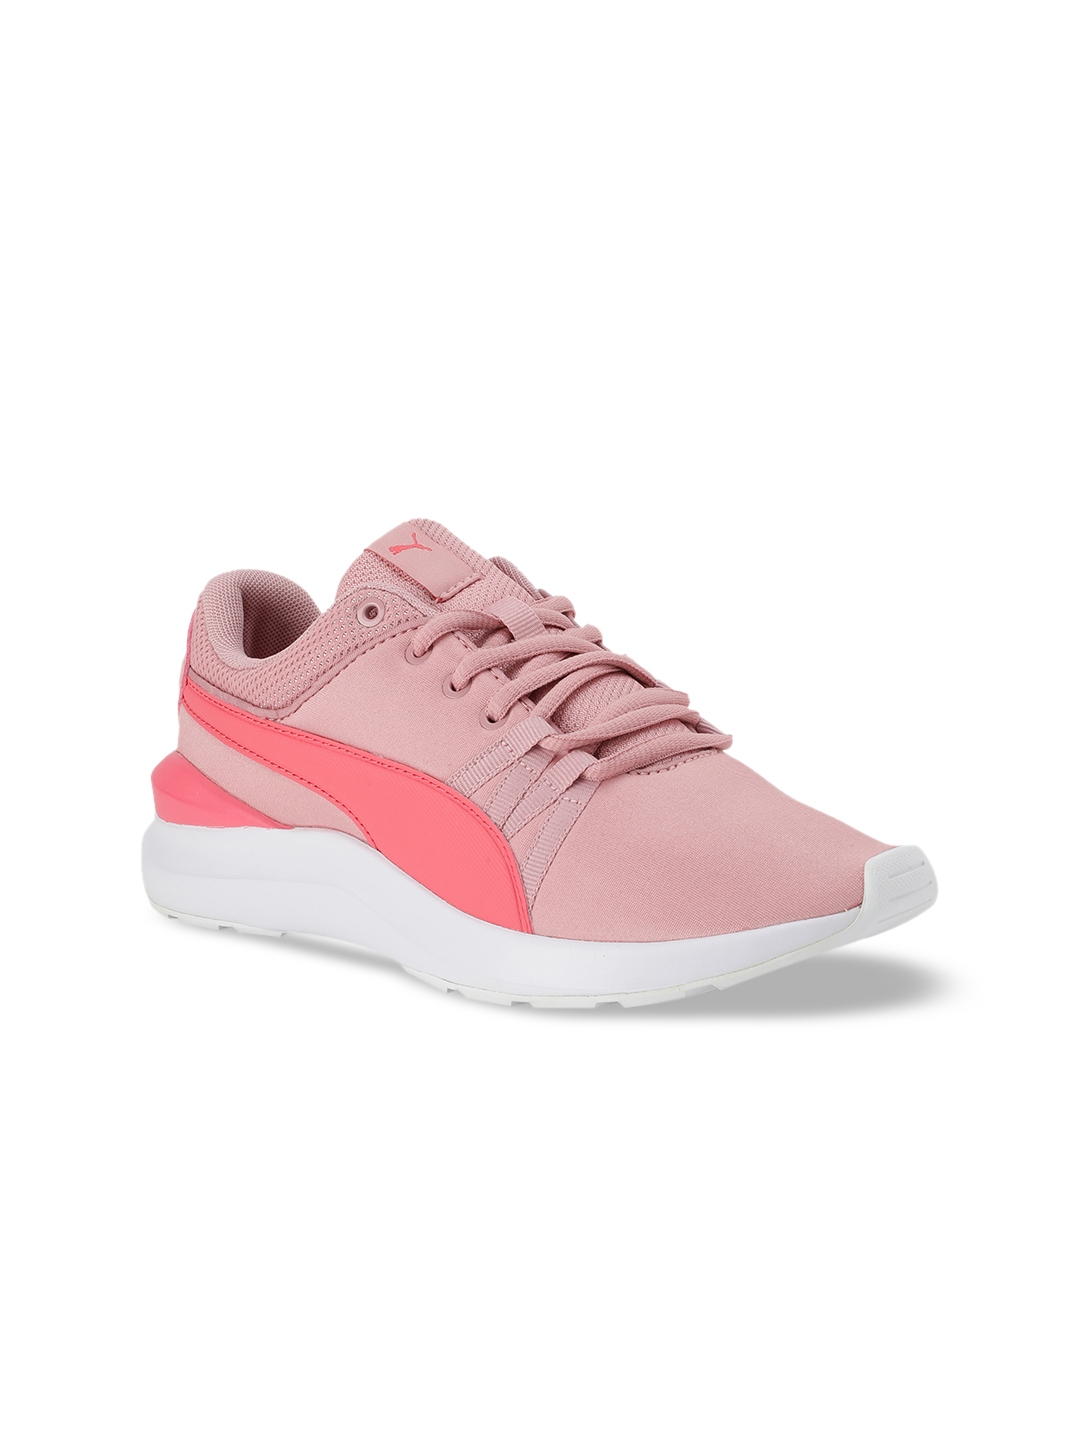 Buy Puma Girls Pink Sneakers - Casual Shoes for Girls 10812770 | Myntra